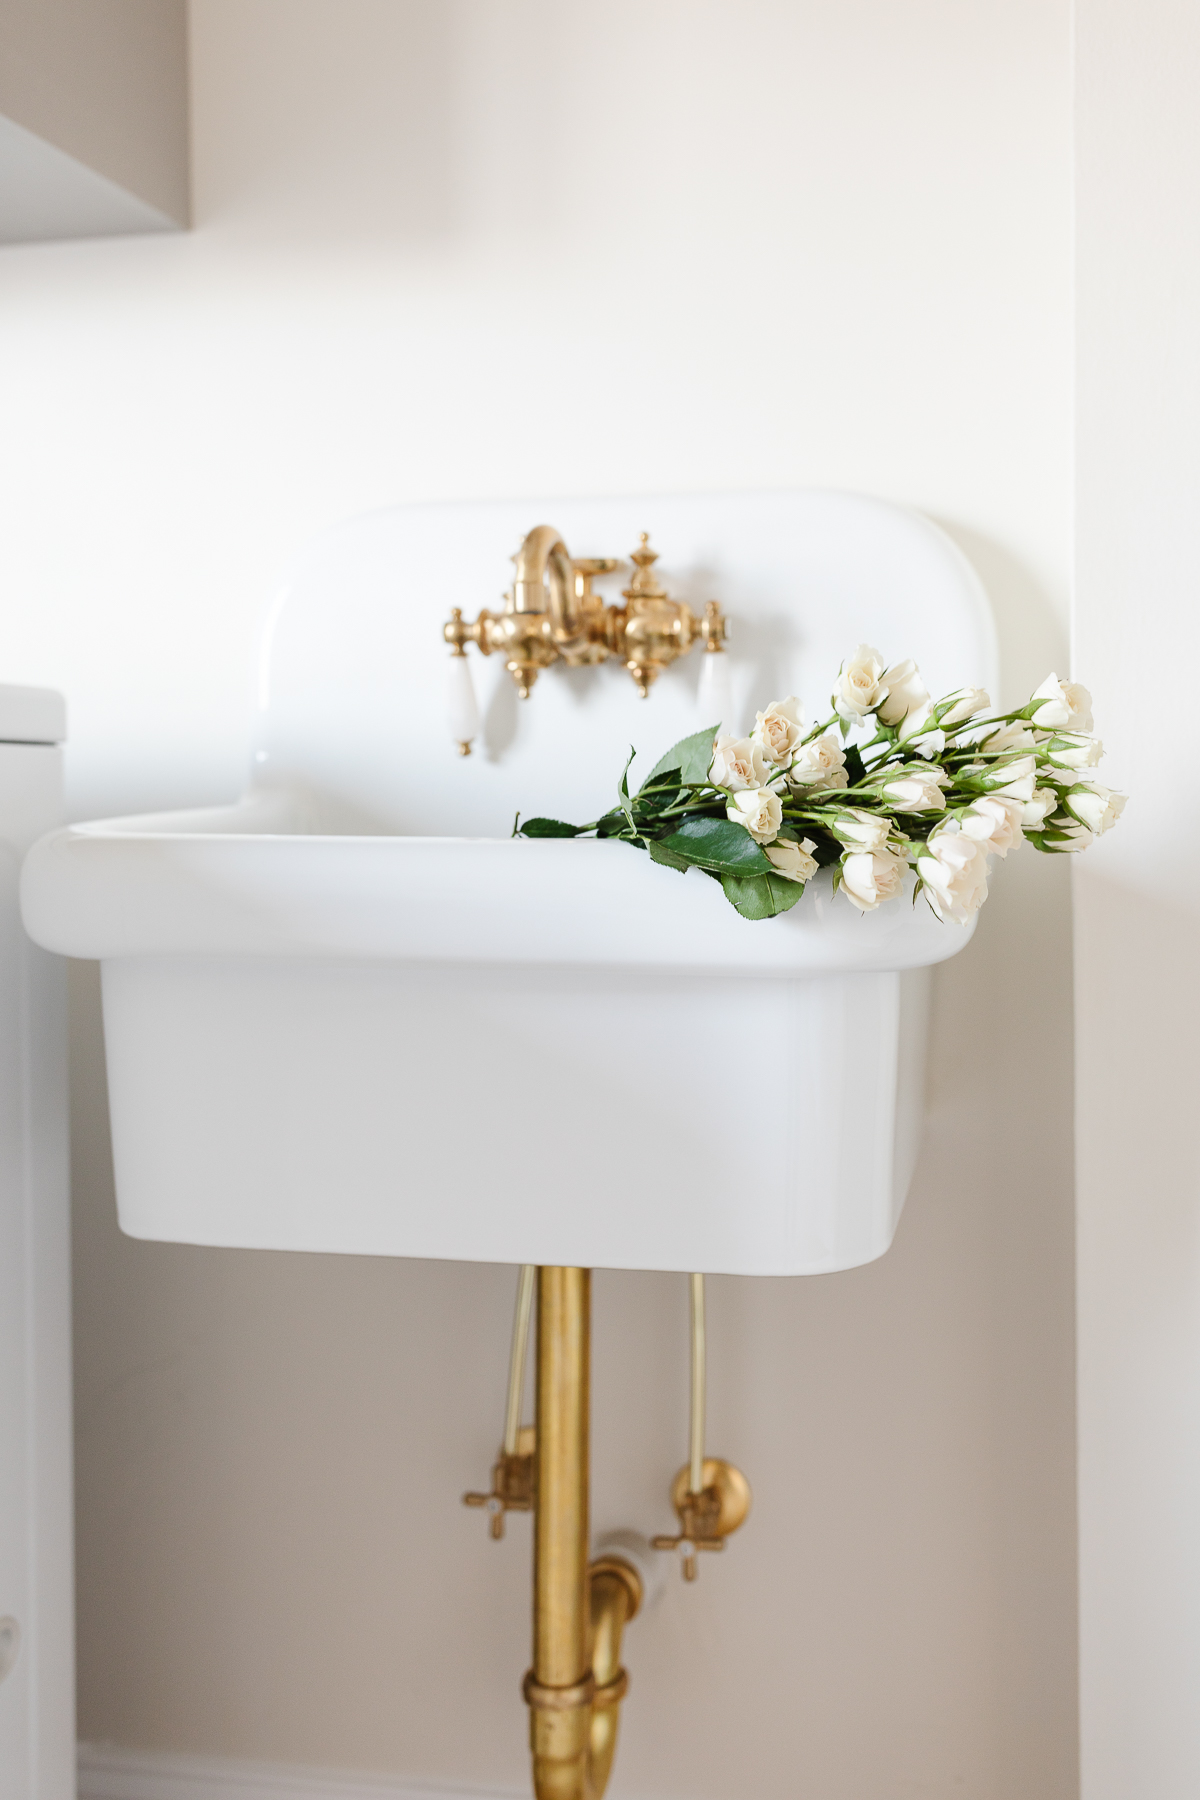 A white ceramic wall mounted sink with brass hardware. 